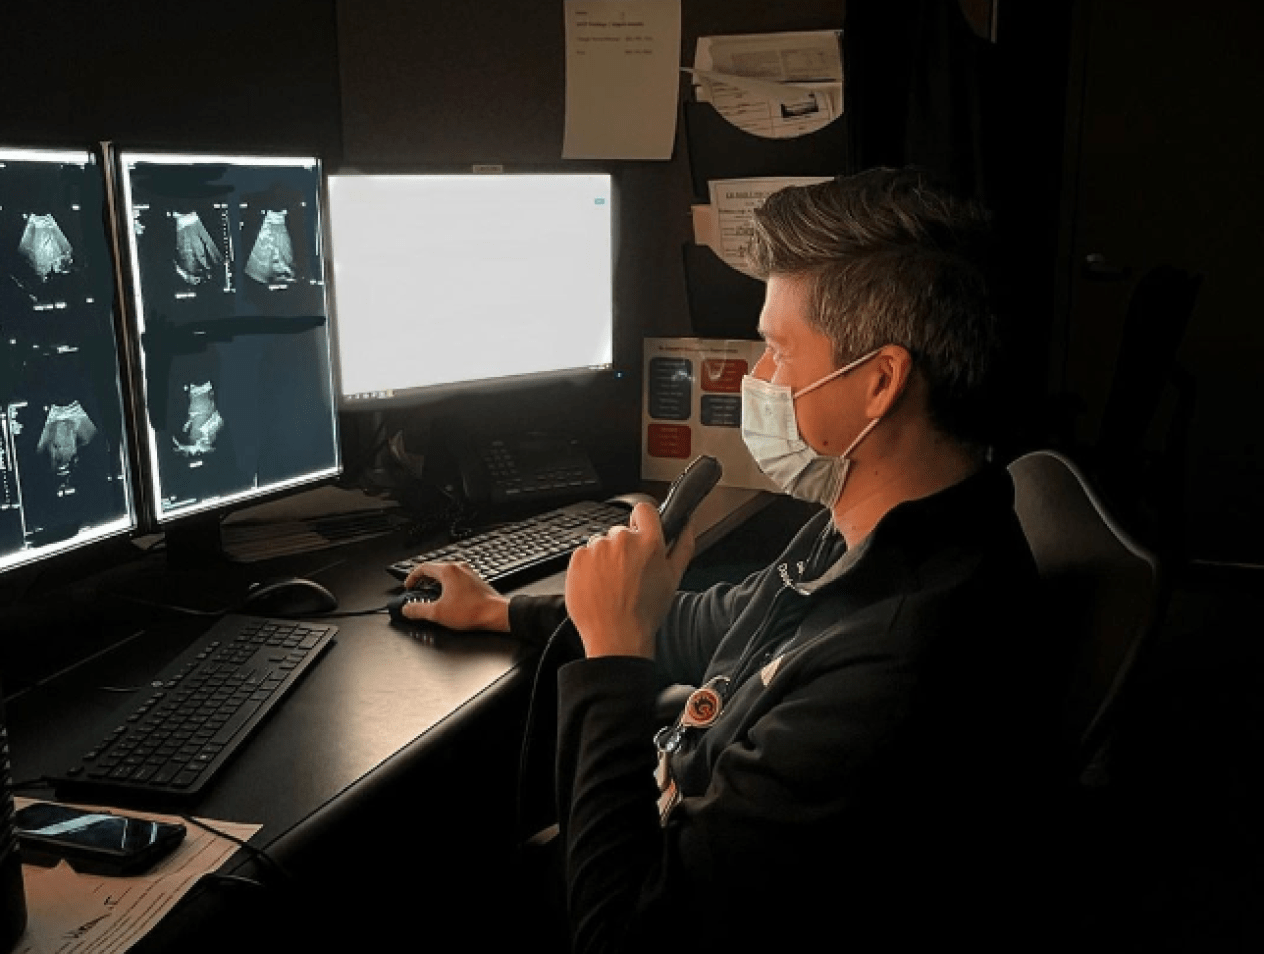 How to Apply Radiology-Diagnostic